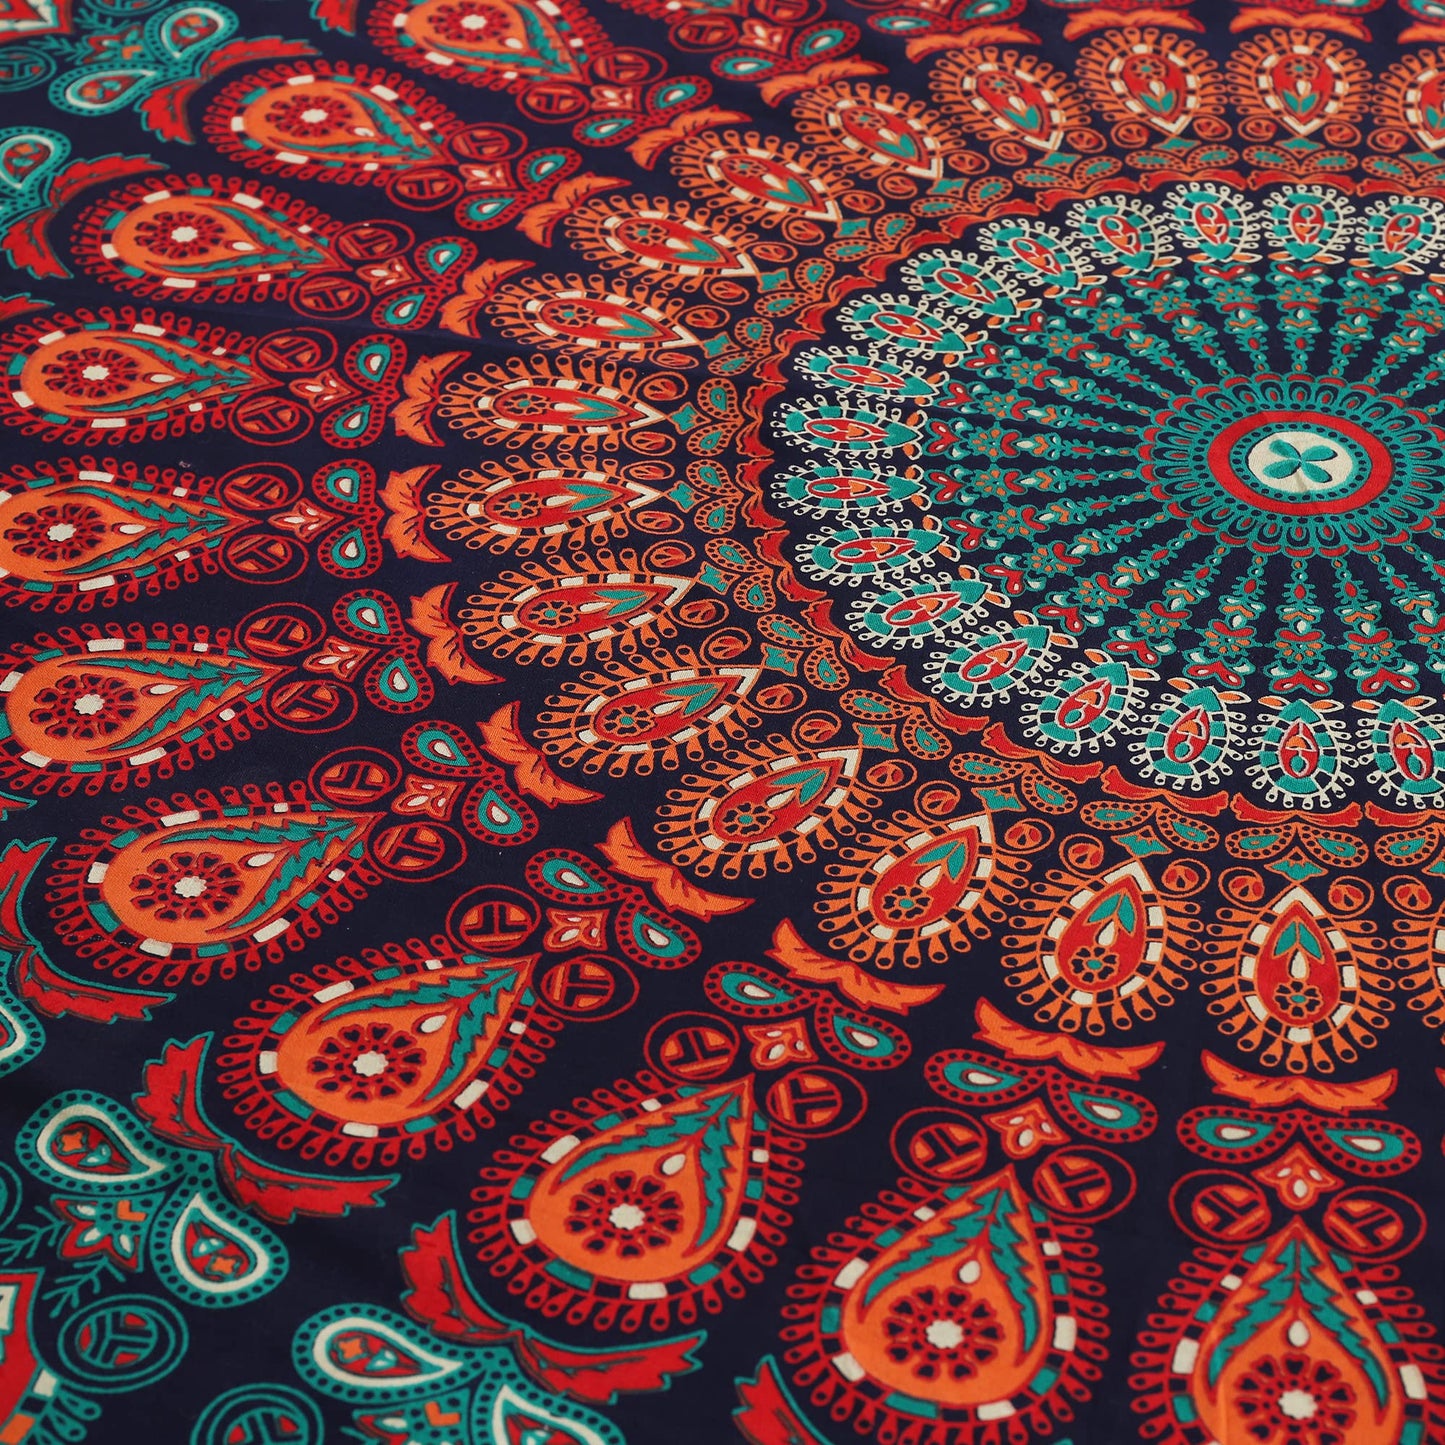 Popular Handicrafts Round tapestry Indian Mandala Round Roundie Beach Throw Tapestry wall hanging Hippy Boho Gypsy Cotton Tablecloth, Round Yoga Sheet 50"